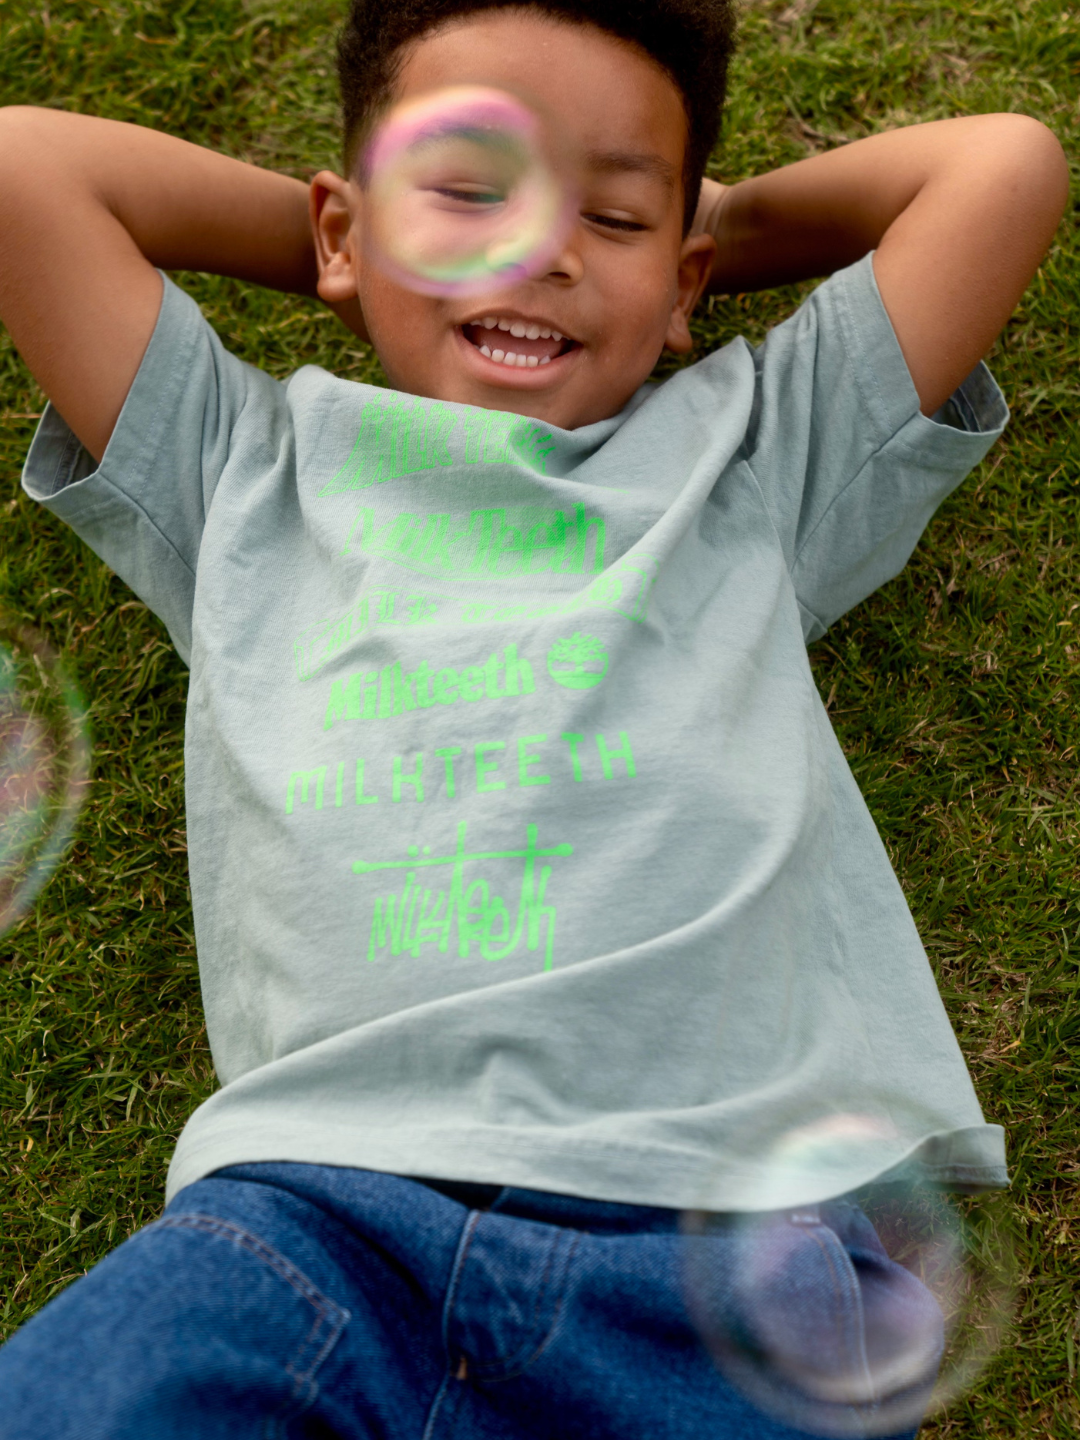 A child wearing a light green t-shirt with Milk Teeth spelled out in various fonts in neon green ink. He wears blue jeans and lies on grass, watching bubbles.